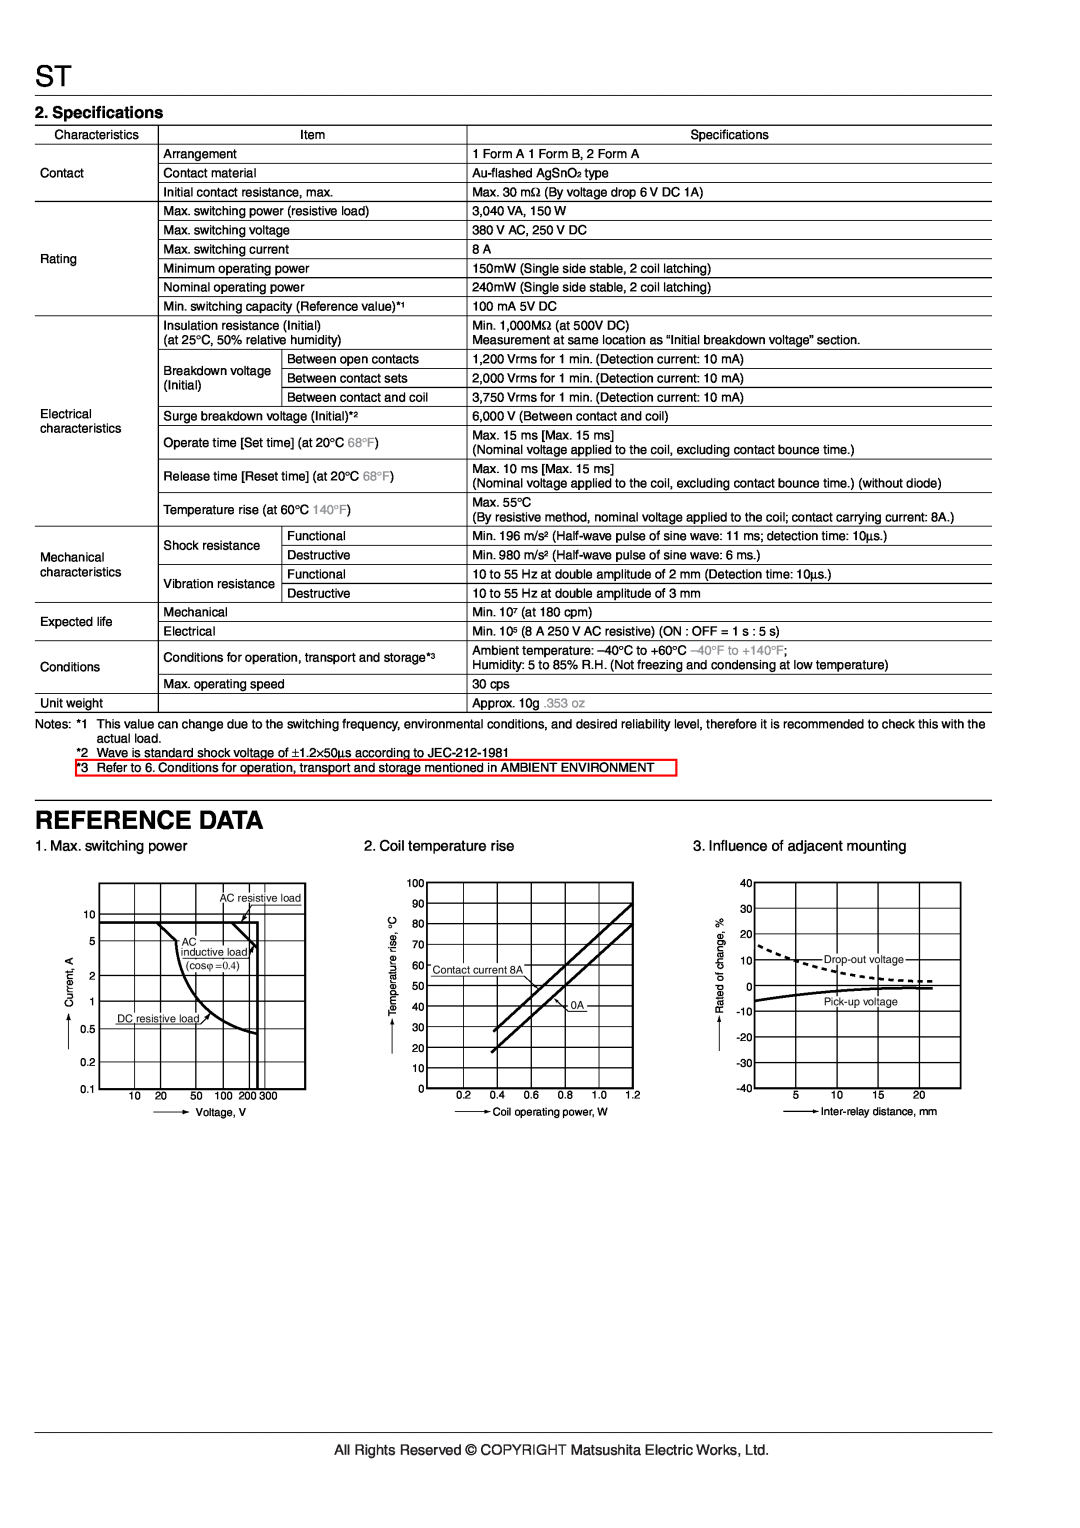 Panasonic IC Drivable PC Board dimensions Reference Data, Speciﬁcations, Max. switching power, Coil temperature rise 